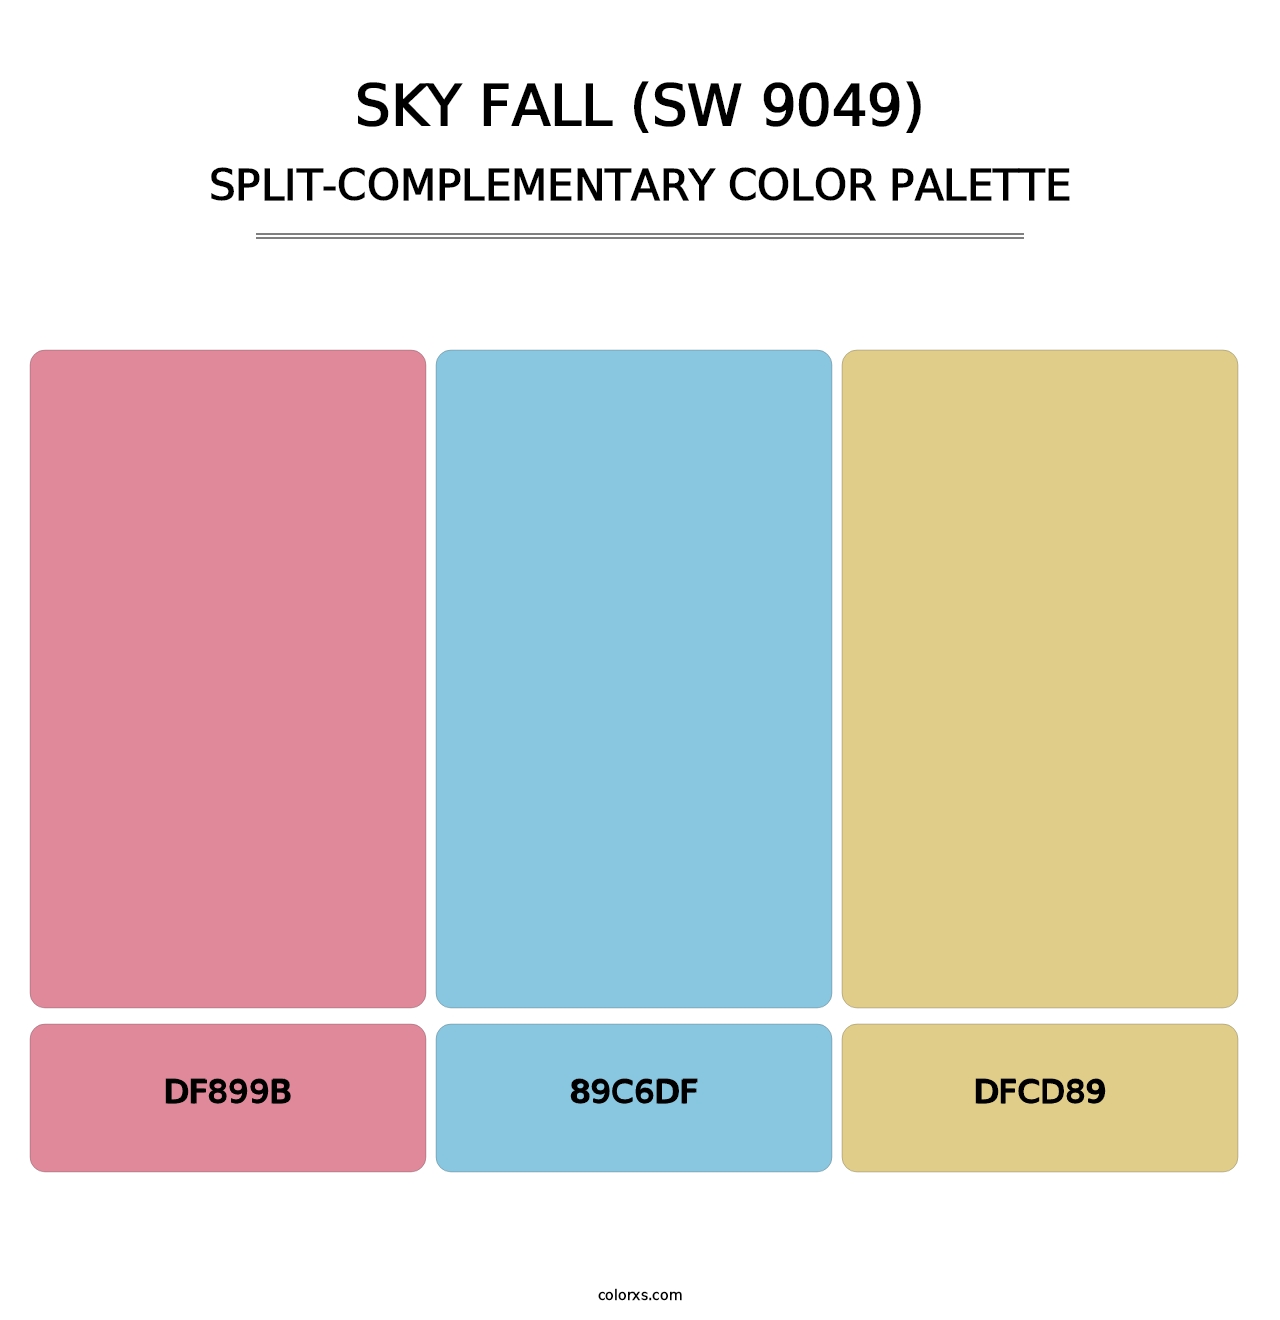 Sky Fall (SW 9049) - Split-Complementary Color Palette